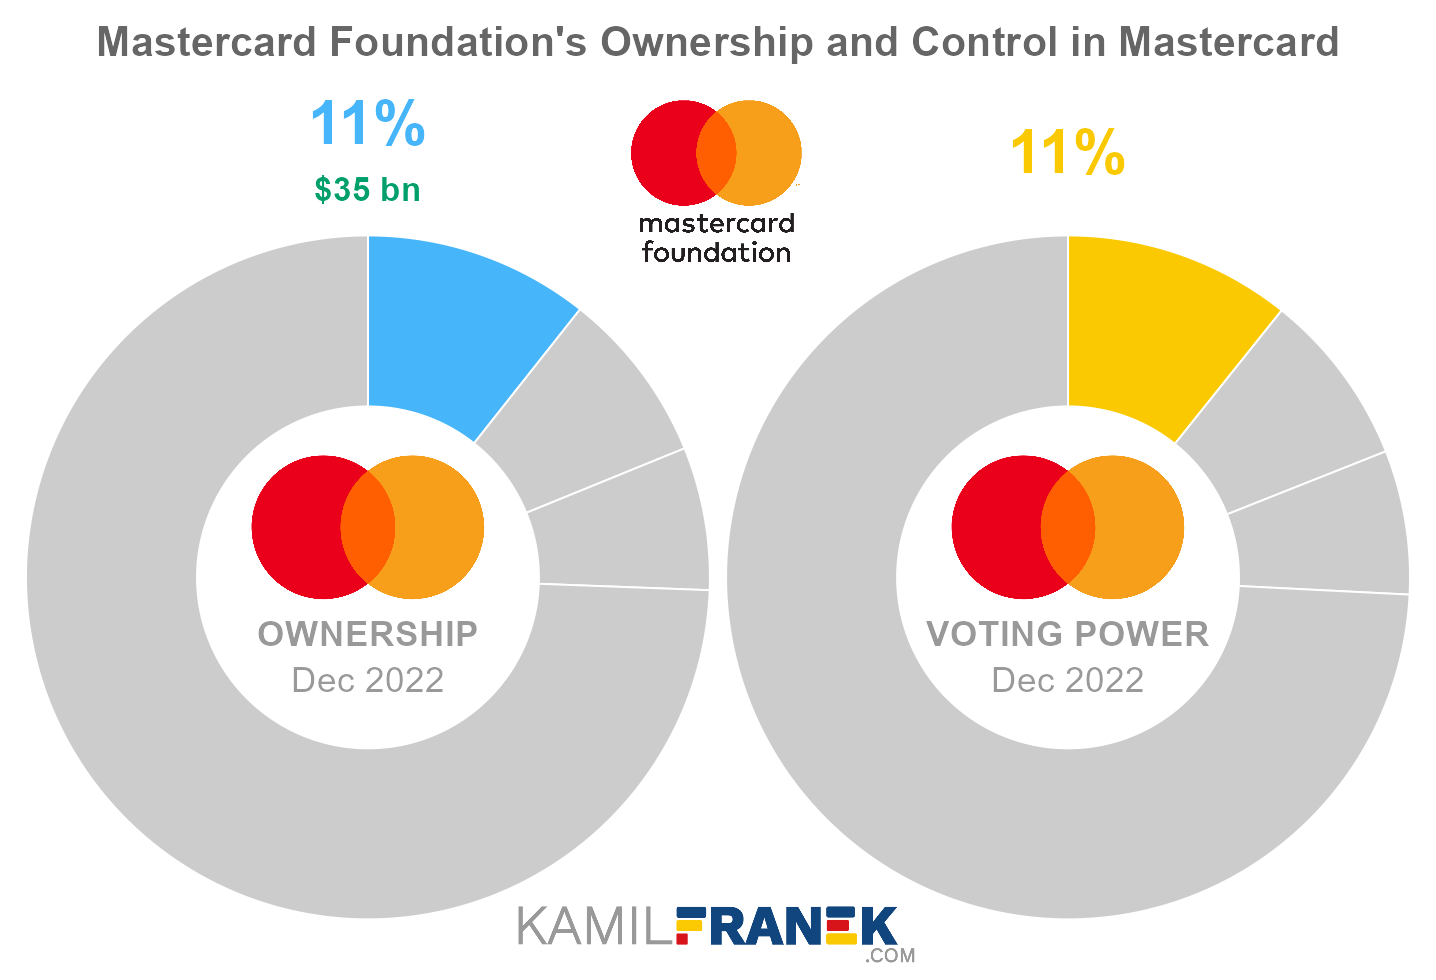 Mastercard Foundation's share ownership and voting power in Mastercard (chart)